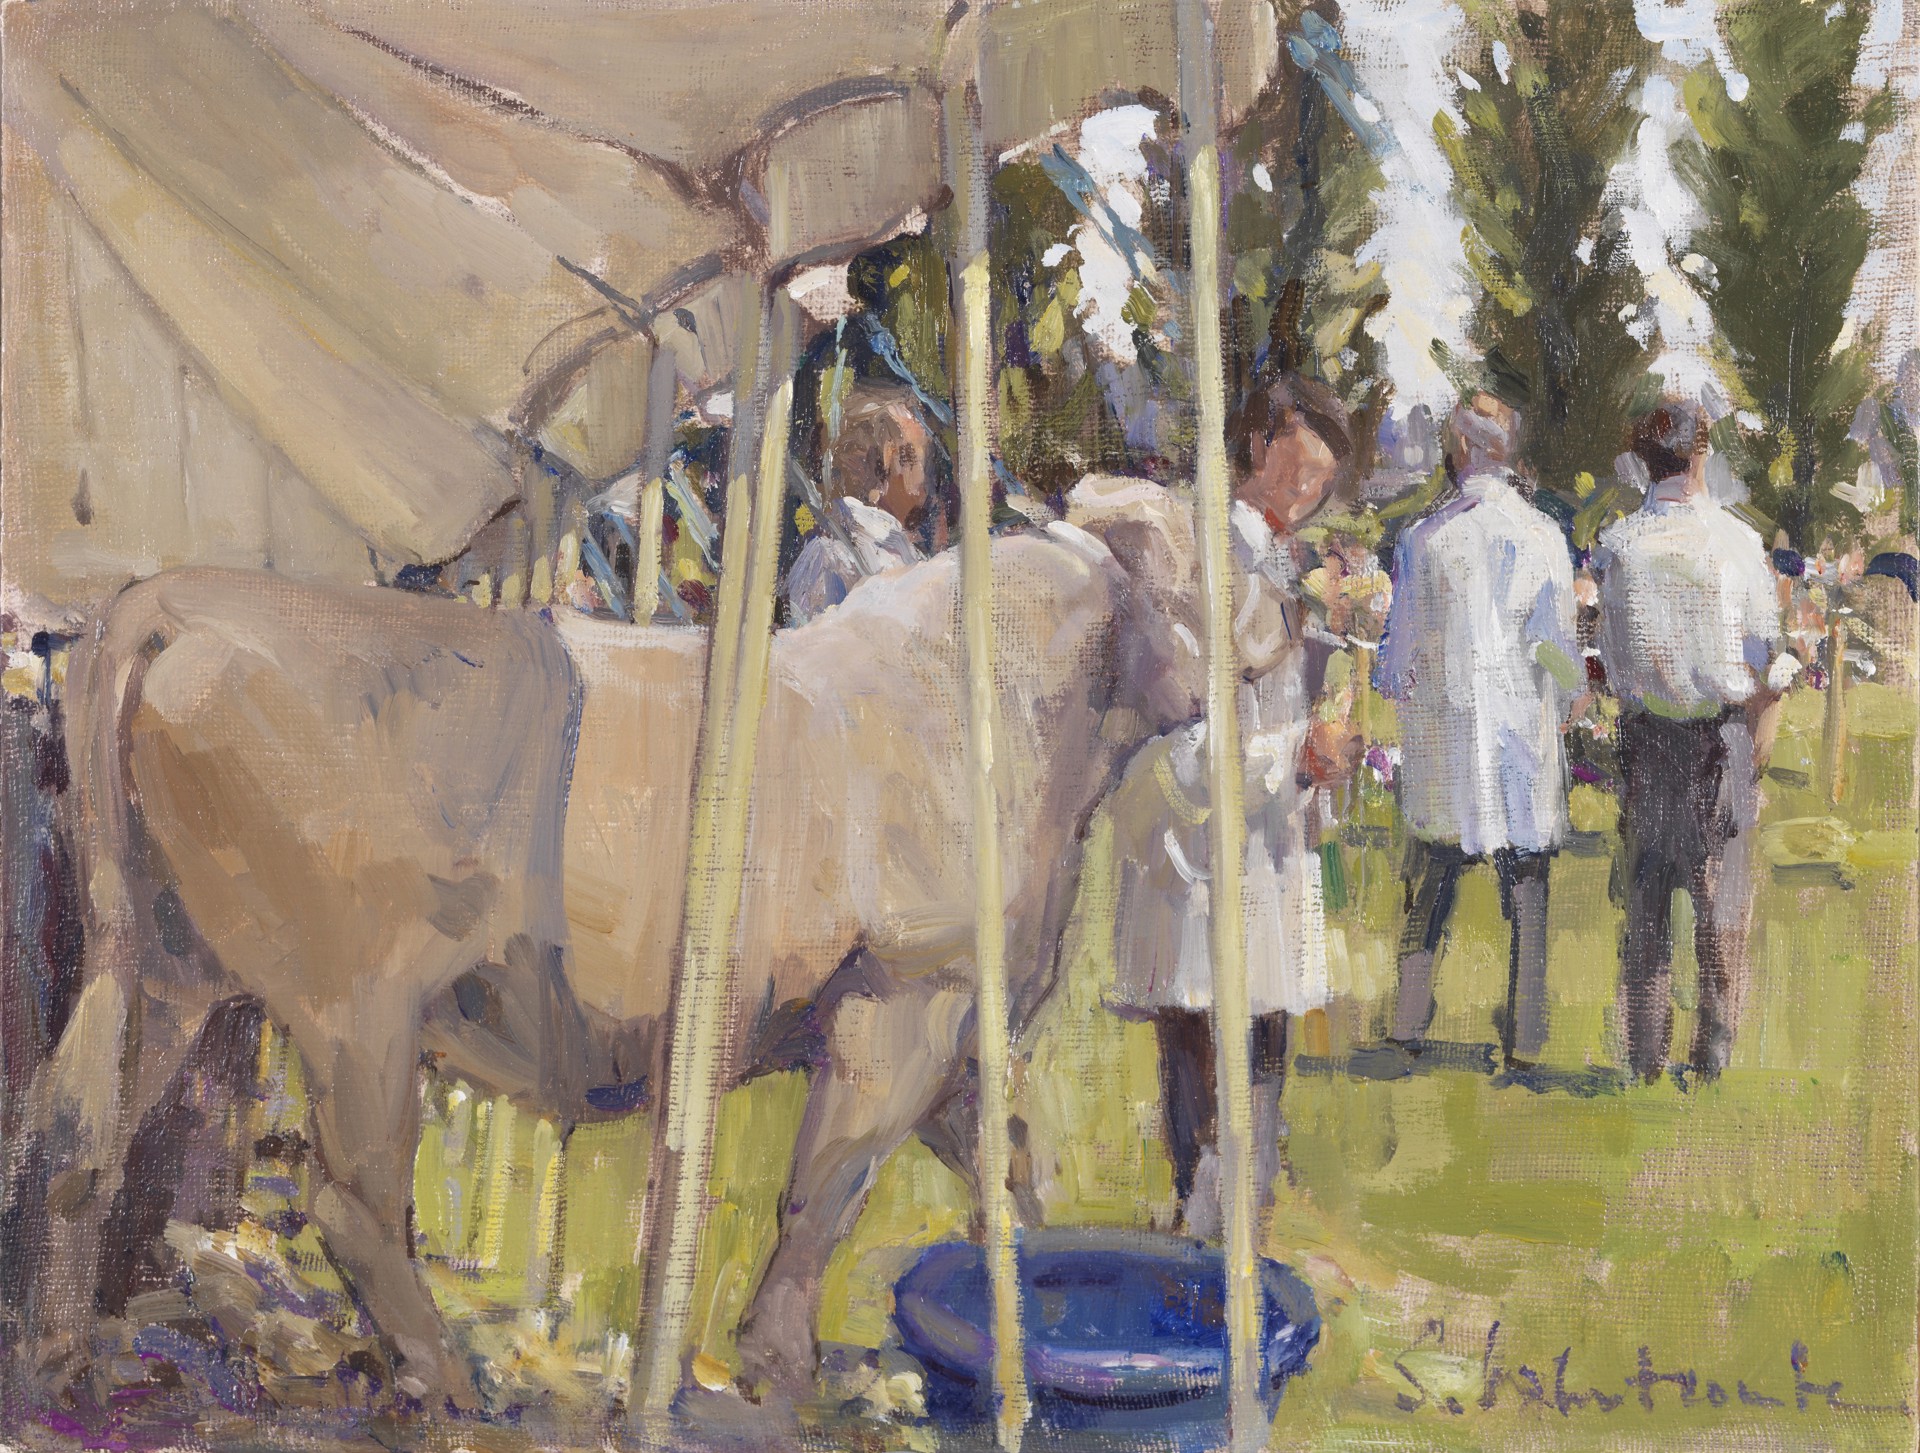 Alton Show Charollais class by Susie Whitcombe